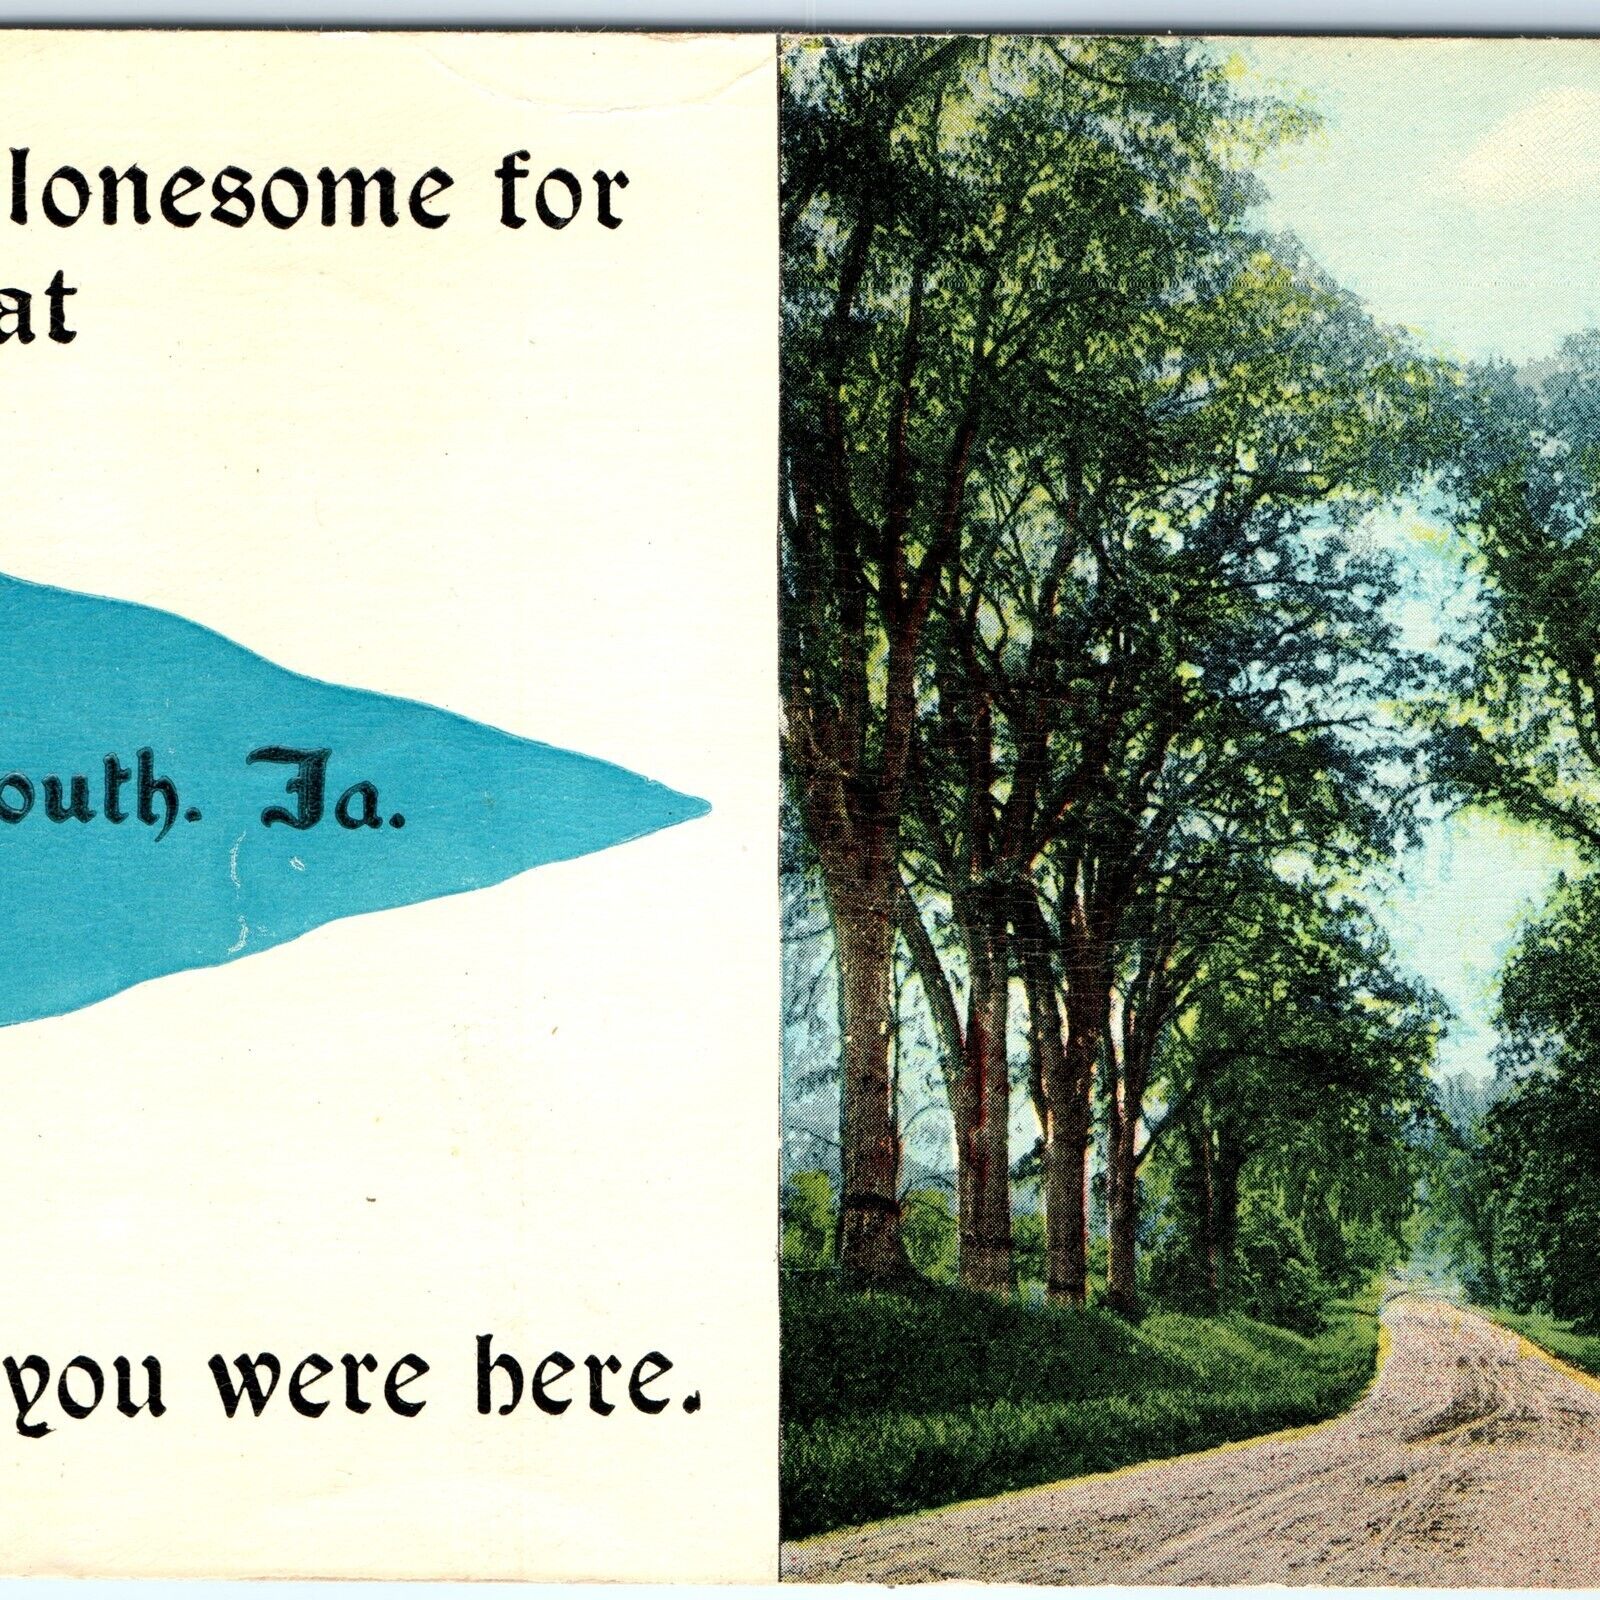 c1910s Plymouth Iowa Lonesome Lonely Miss You Wish Here Pennant Postcard IA A117